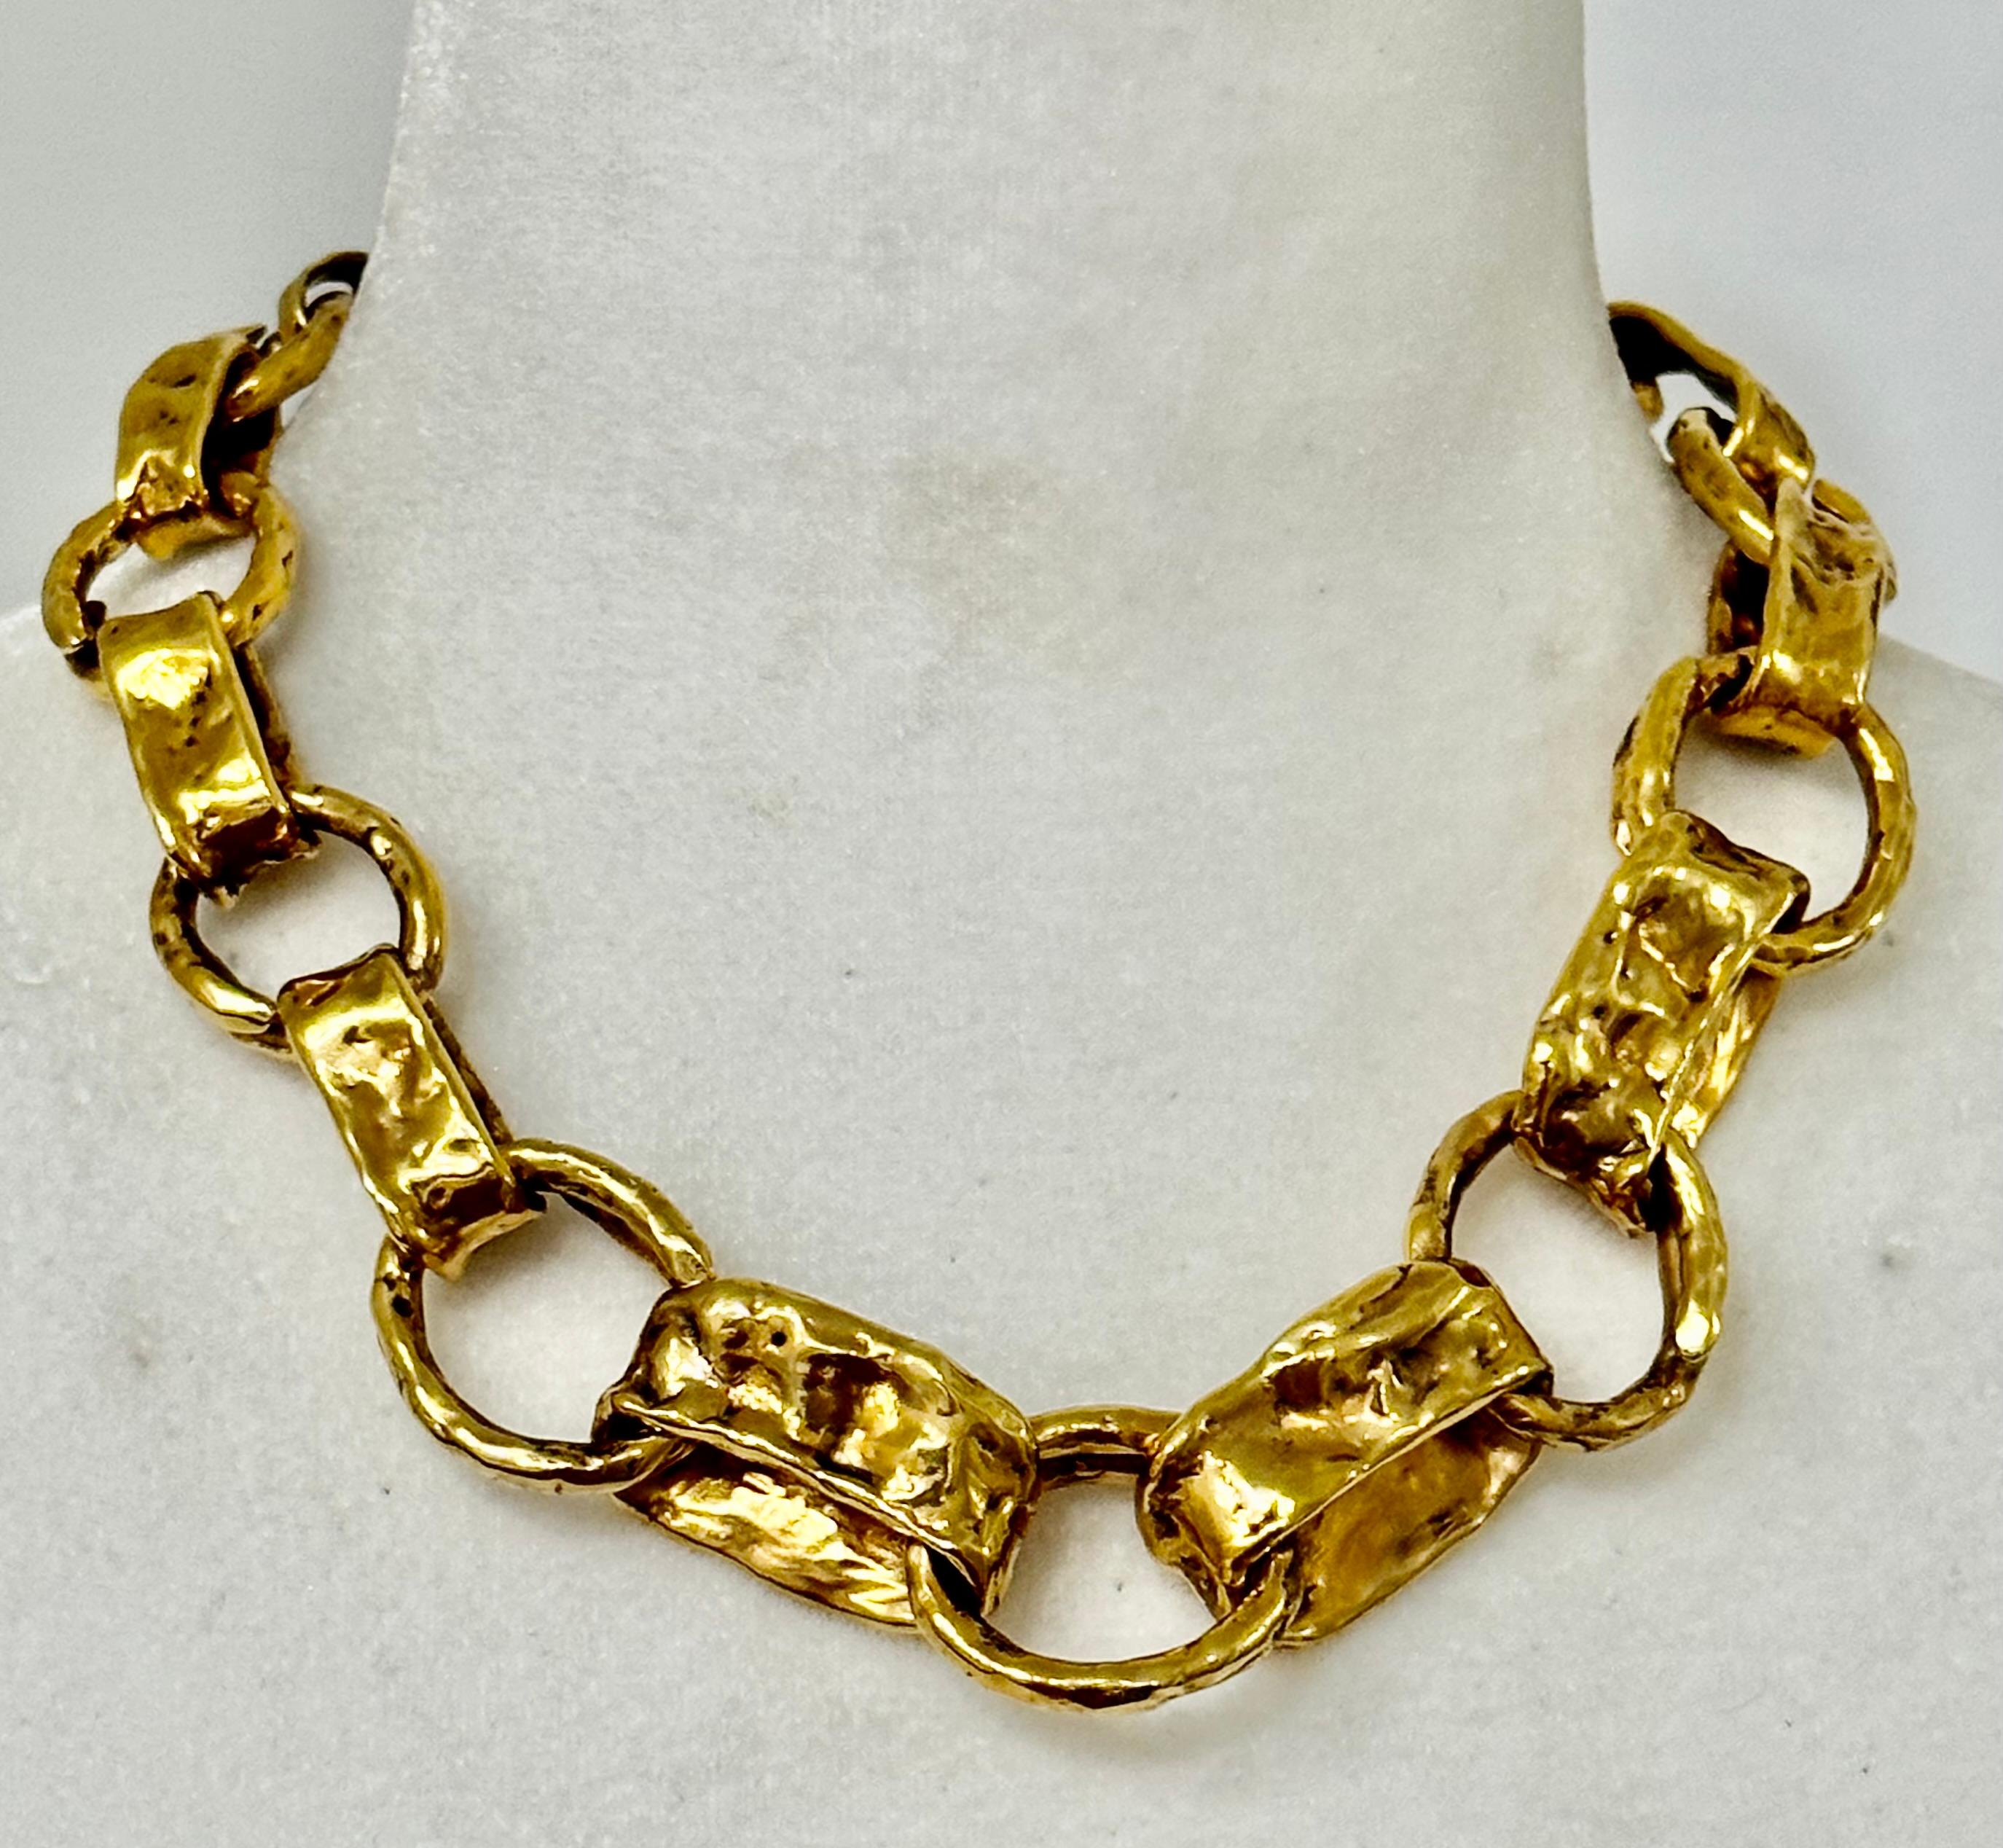 Iconic jewellery by the House of Goossens. Chain necklace from the Lutece  collection featuring surprisingly light oval and textured links. Yellow gold finish. A striking piece, to be worn alone or with other Goossens jewellery.
24-carat gilded Brass